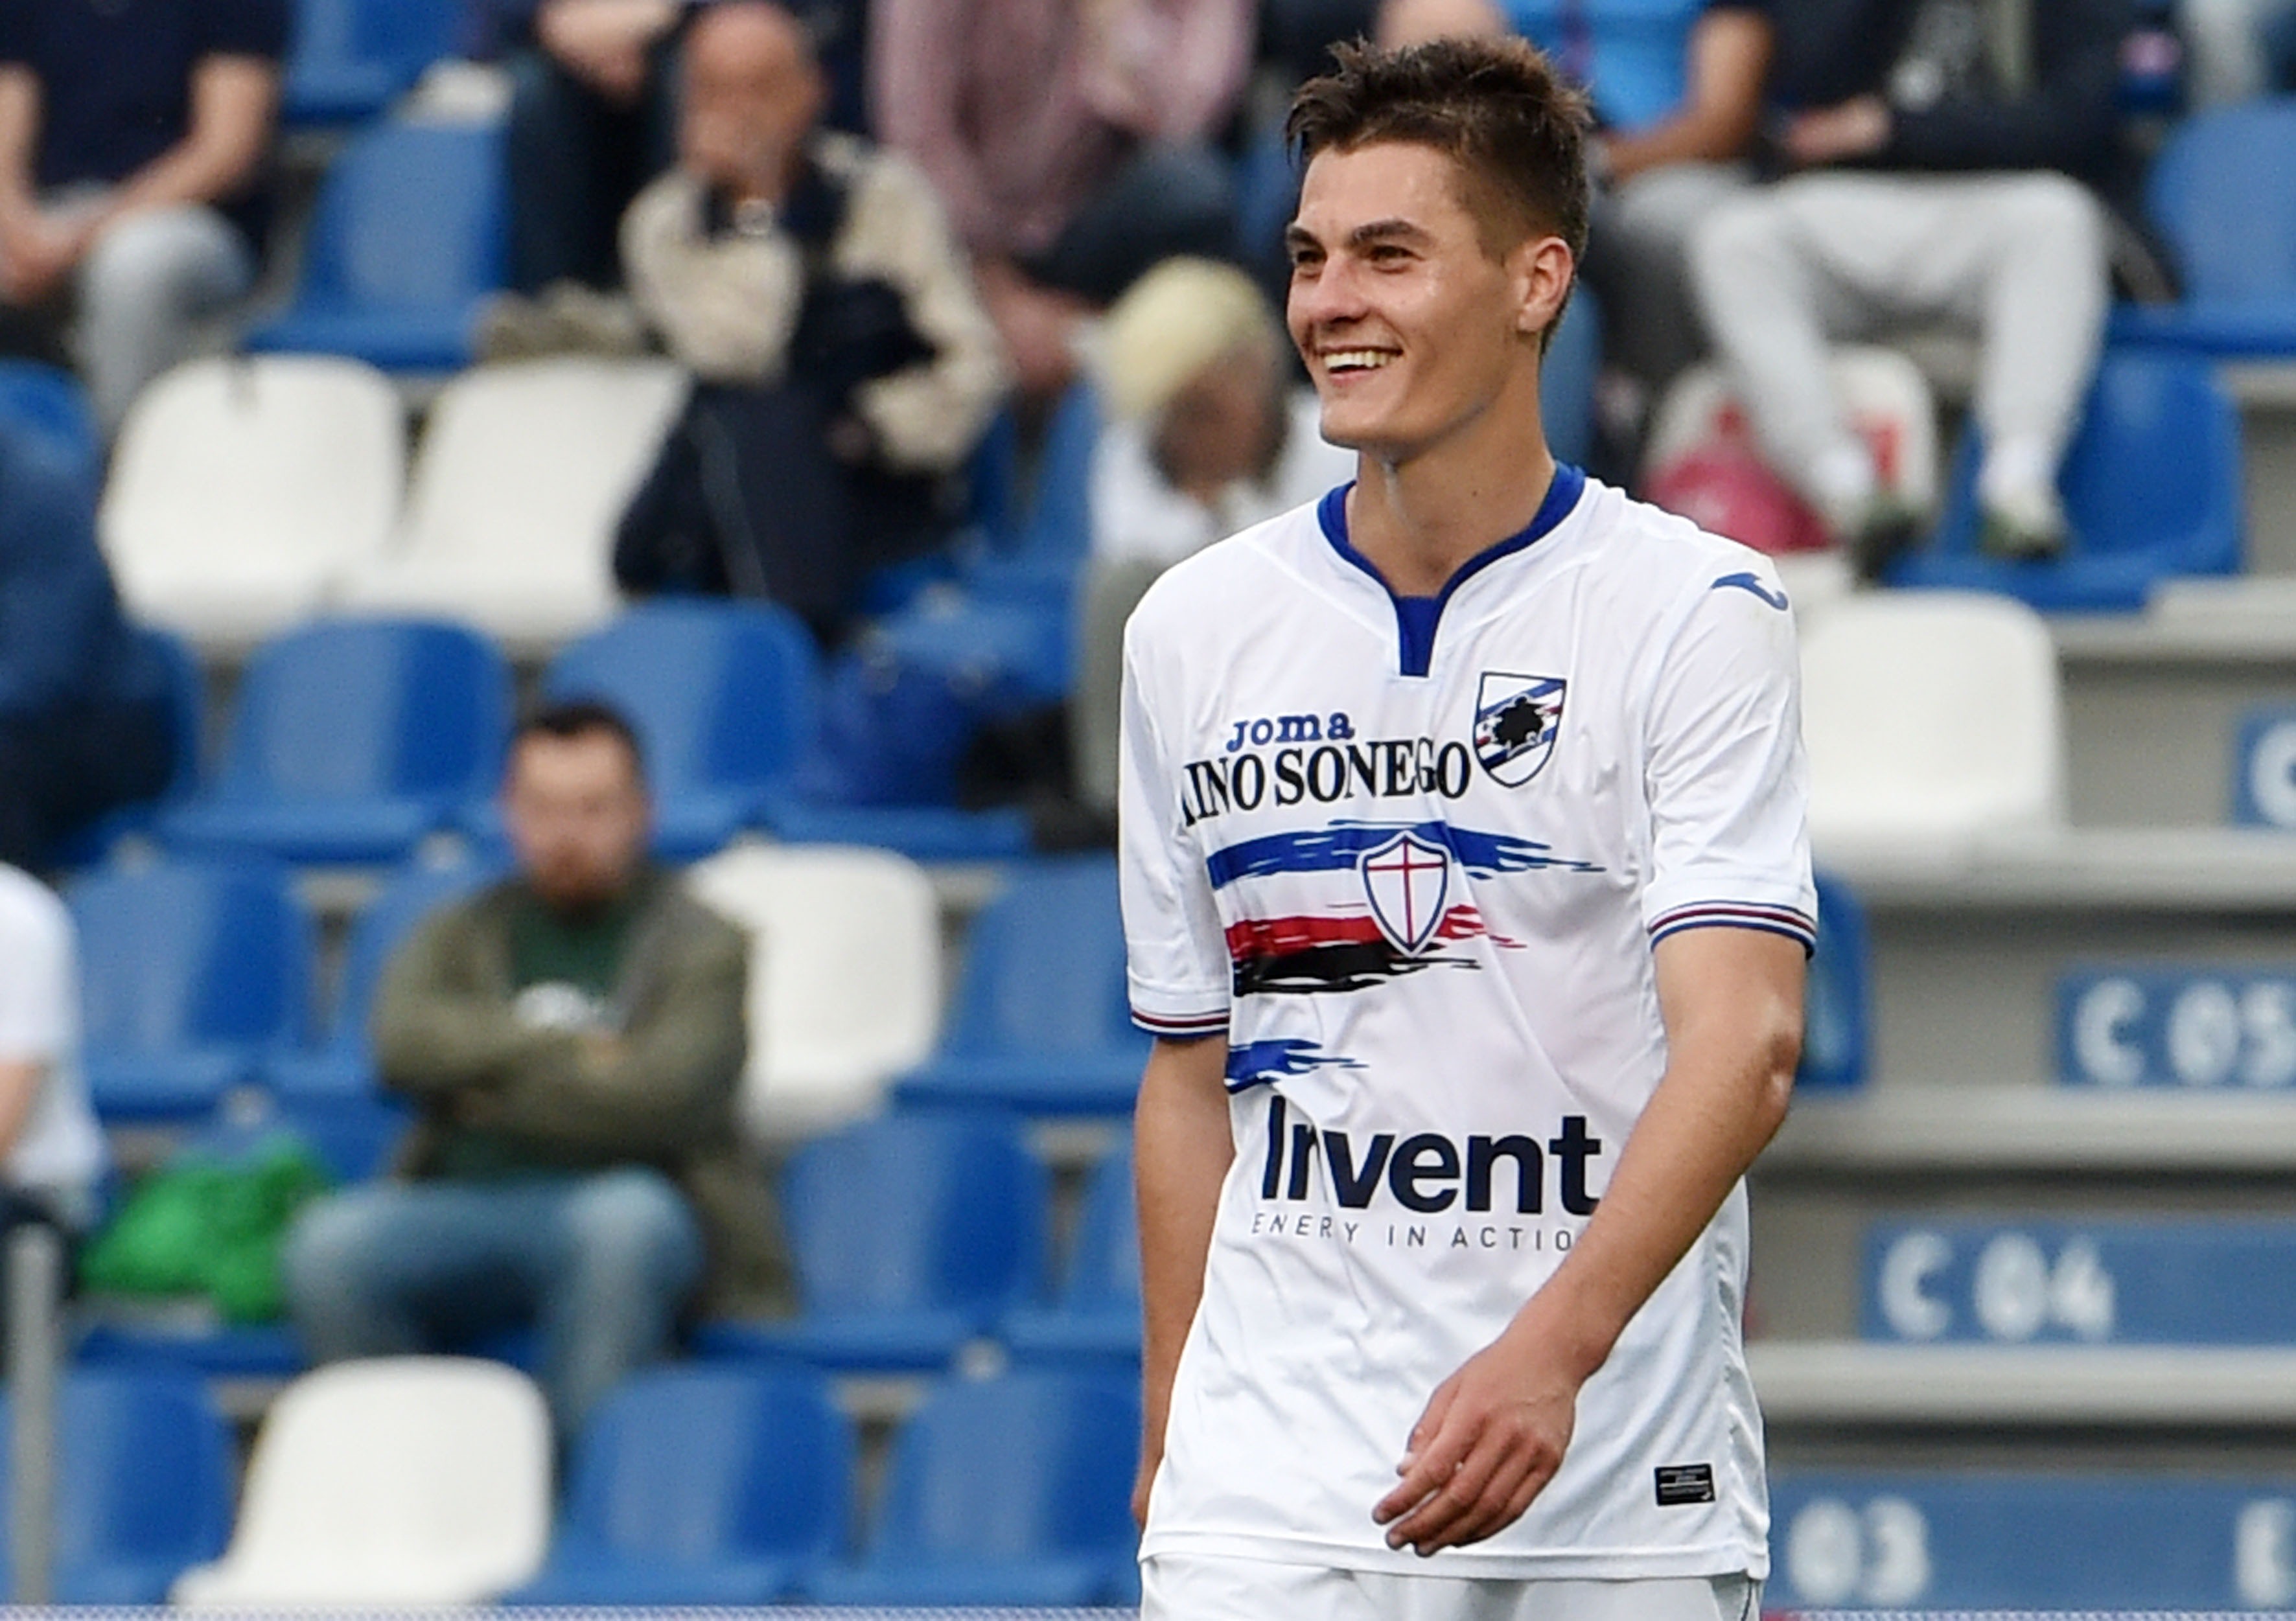 Lulic to TMW: “I think Schick and I would do better if we remain at Samp next year”